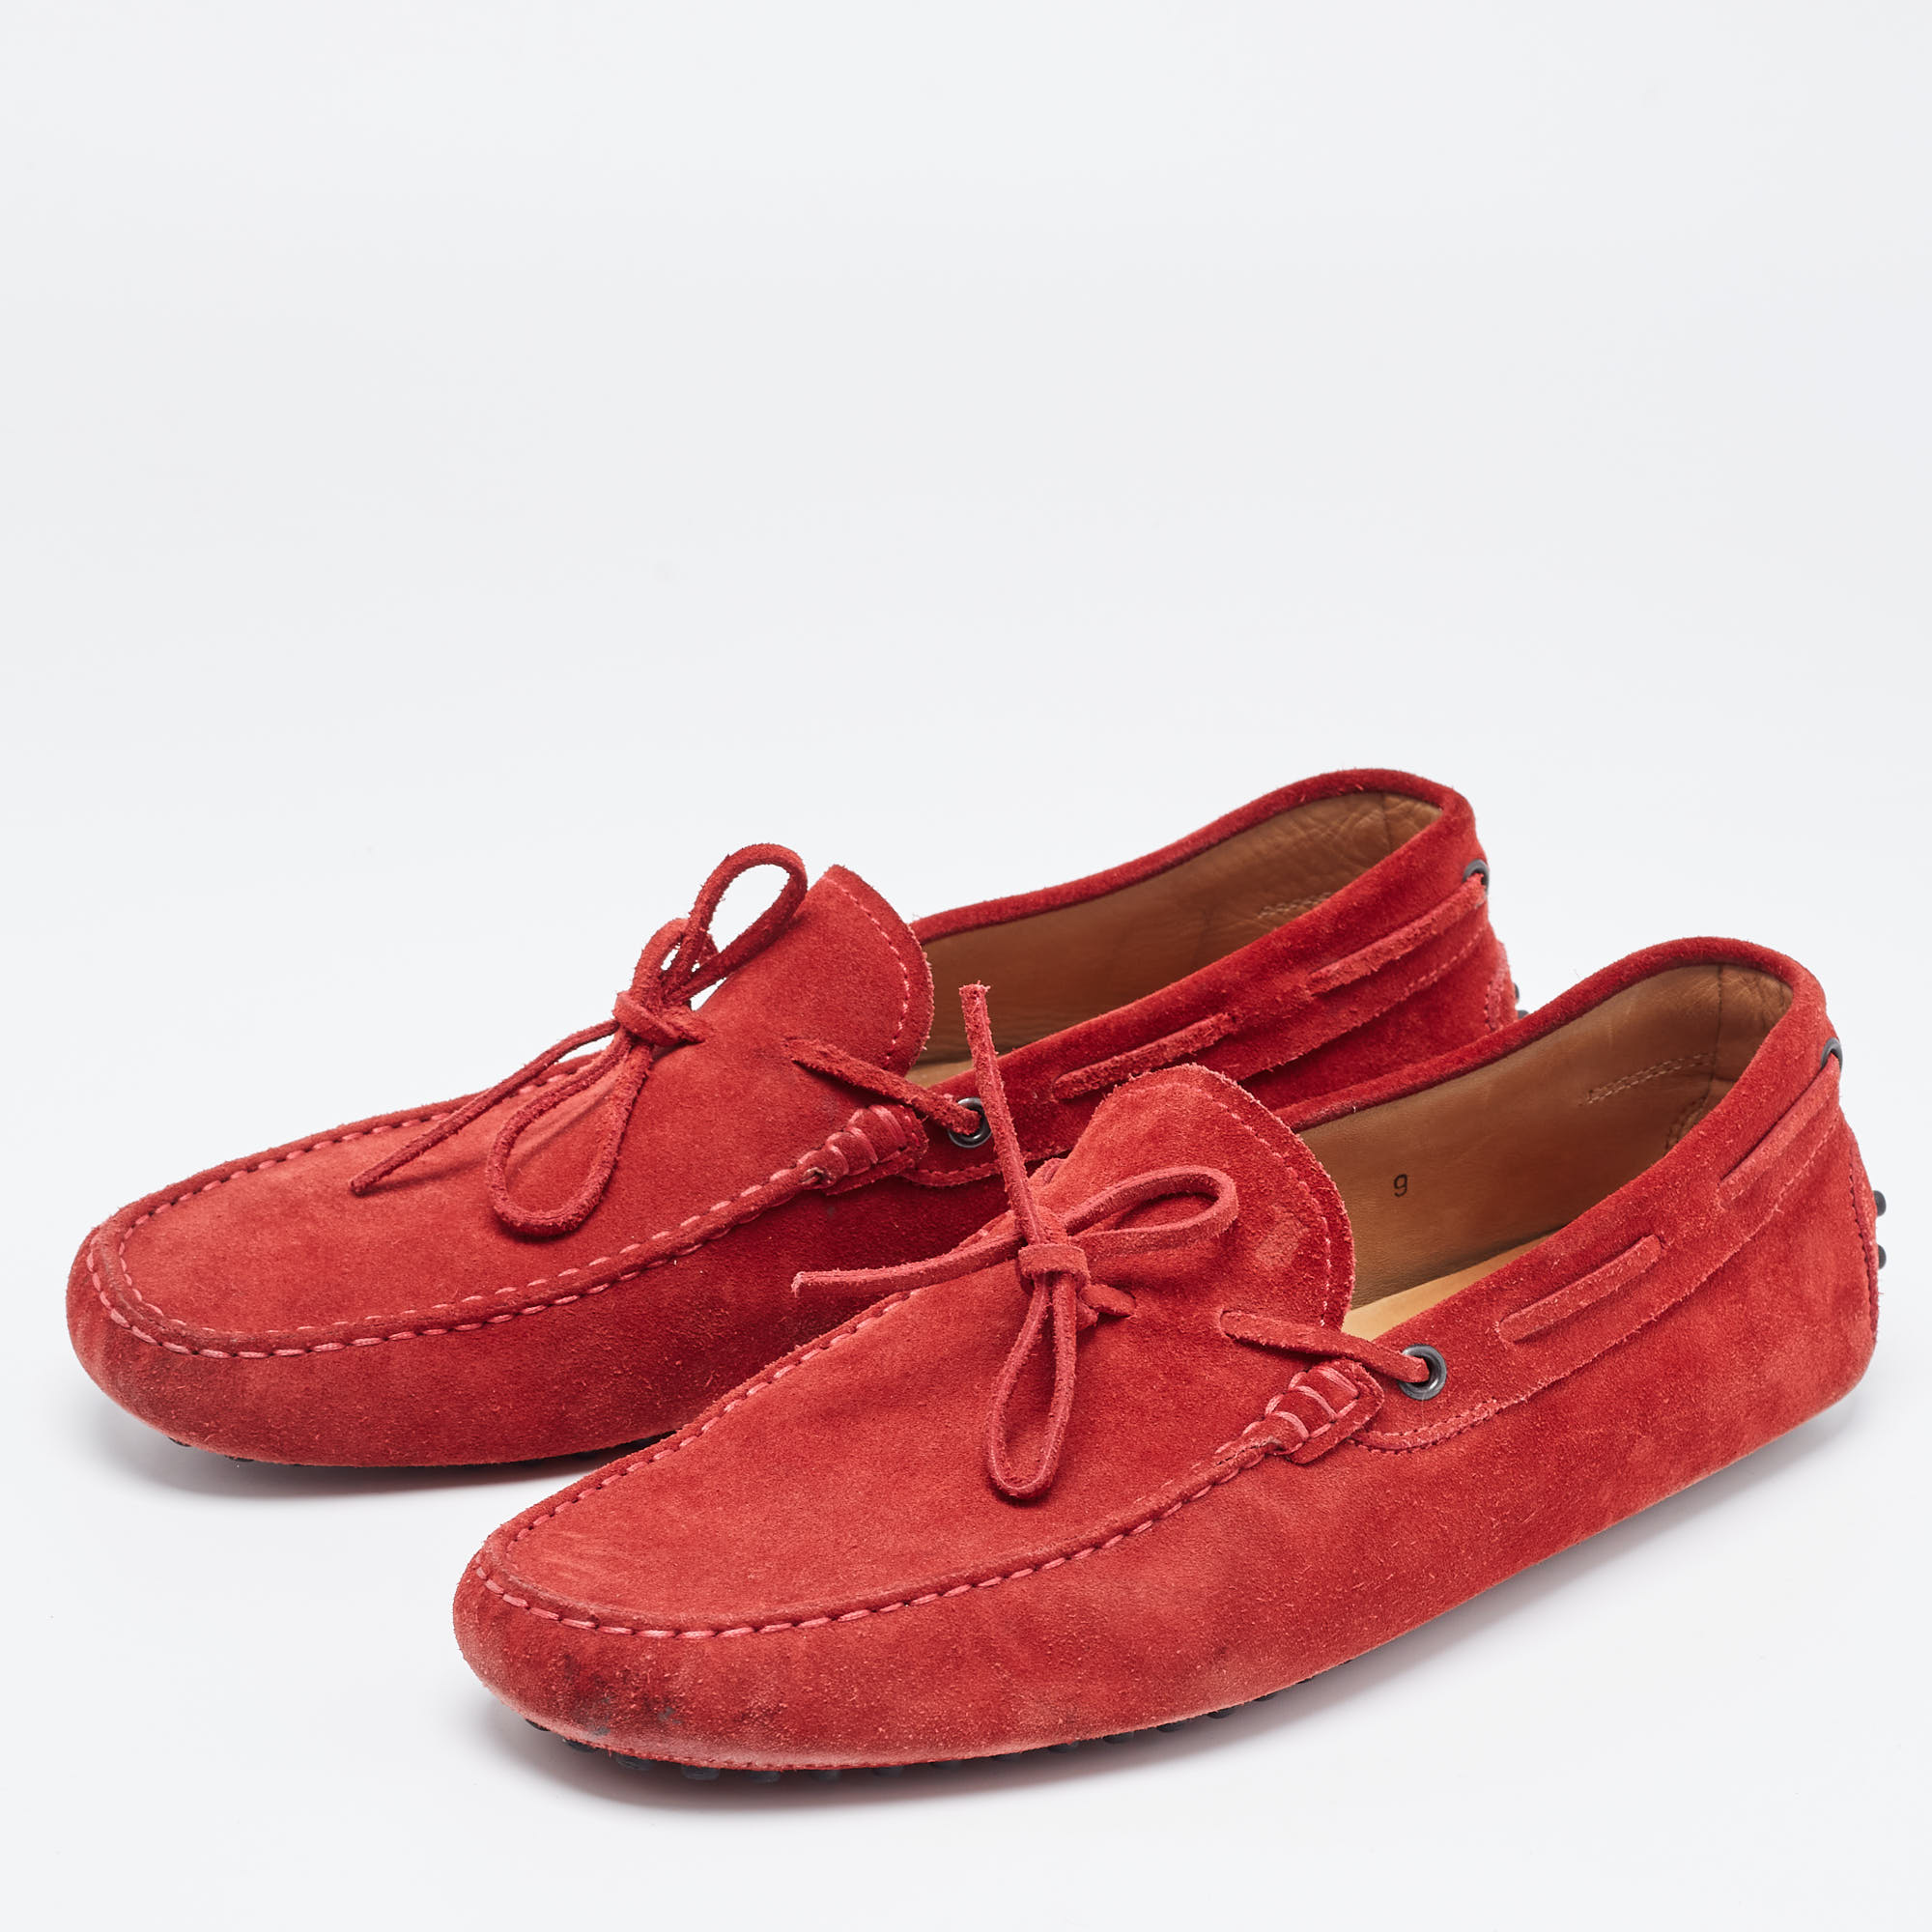 

Tod's Red Suede Gommino Bow Driving Slip On Loafers Size